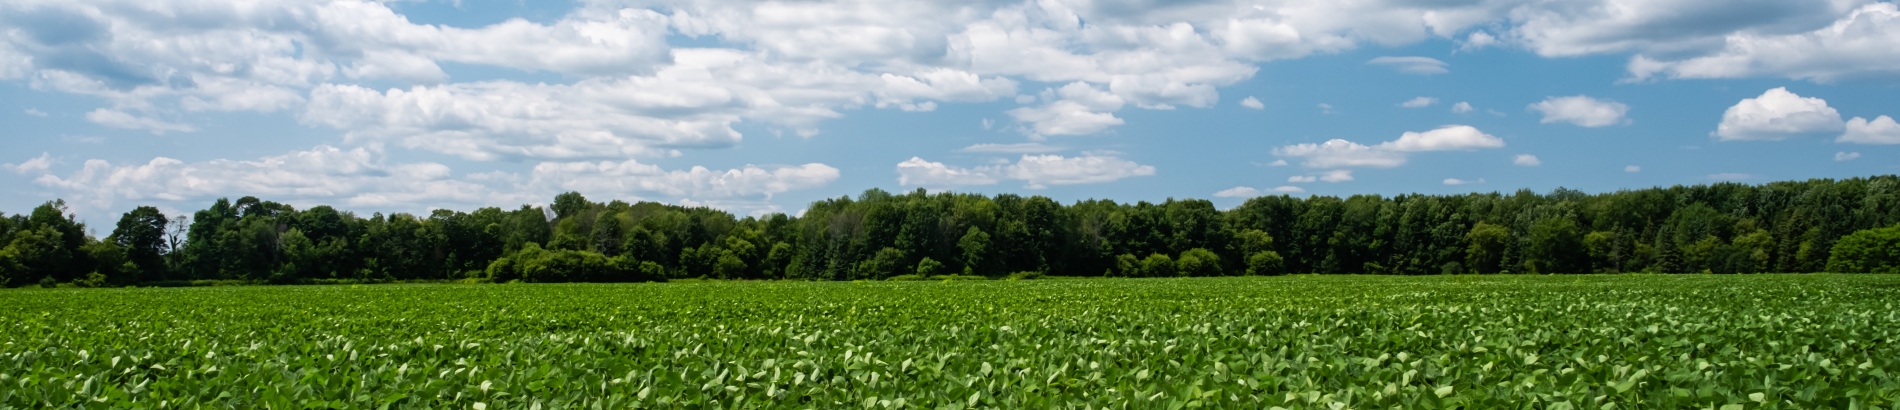 Bean field in front of small forested area